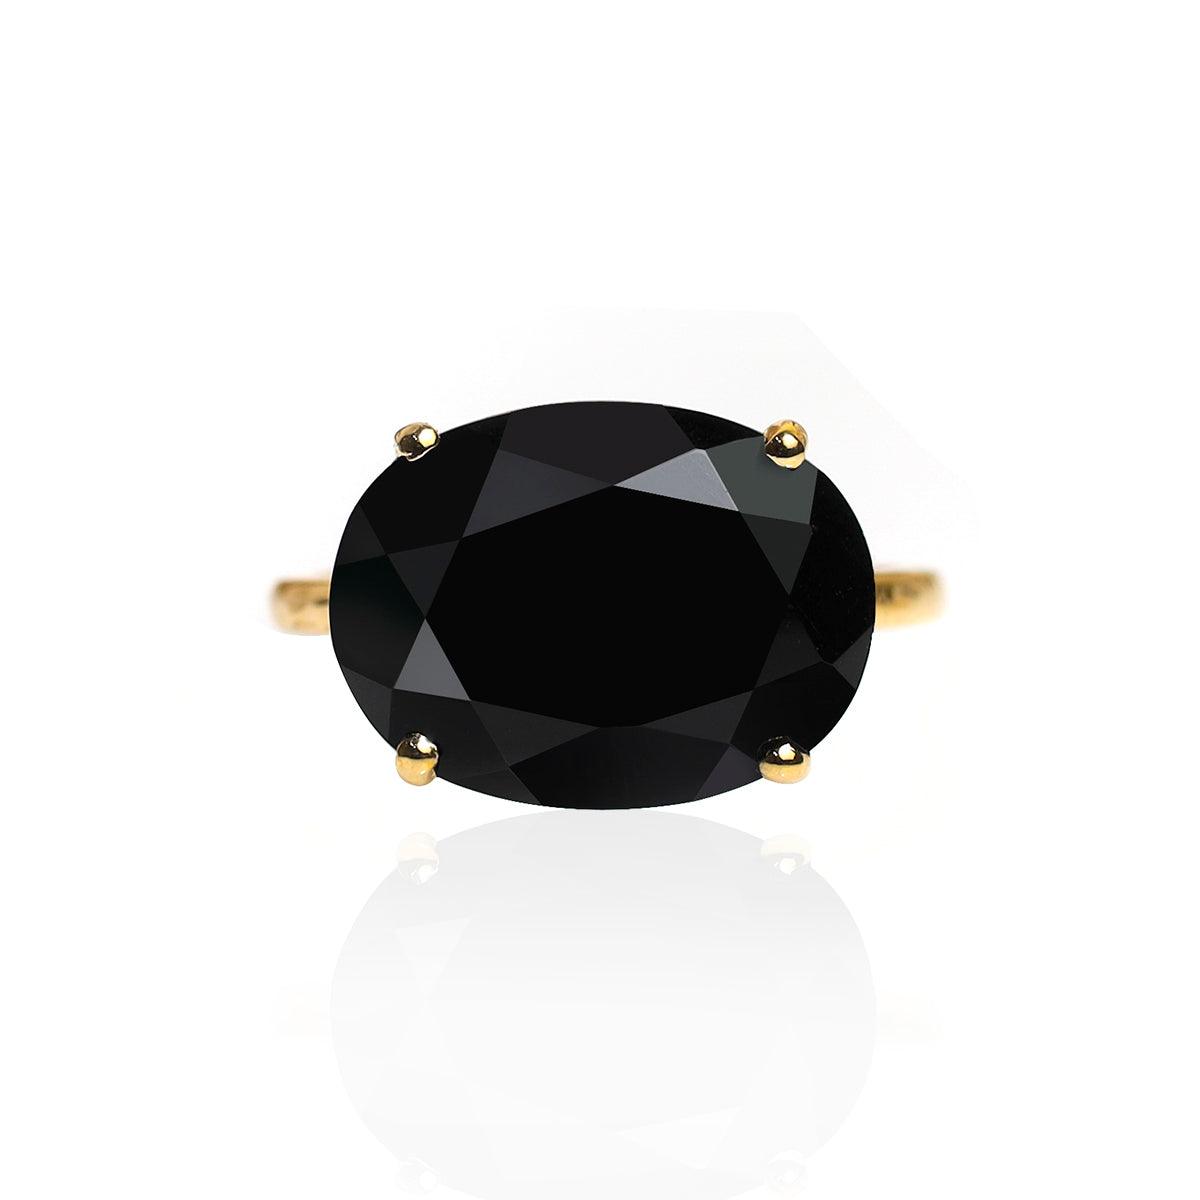 Black Onyx Solitaire Ring 14k Gold Over 925 Silver - YoTreasure